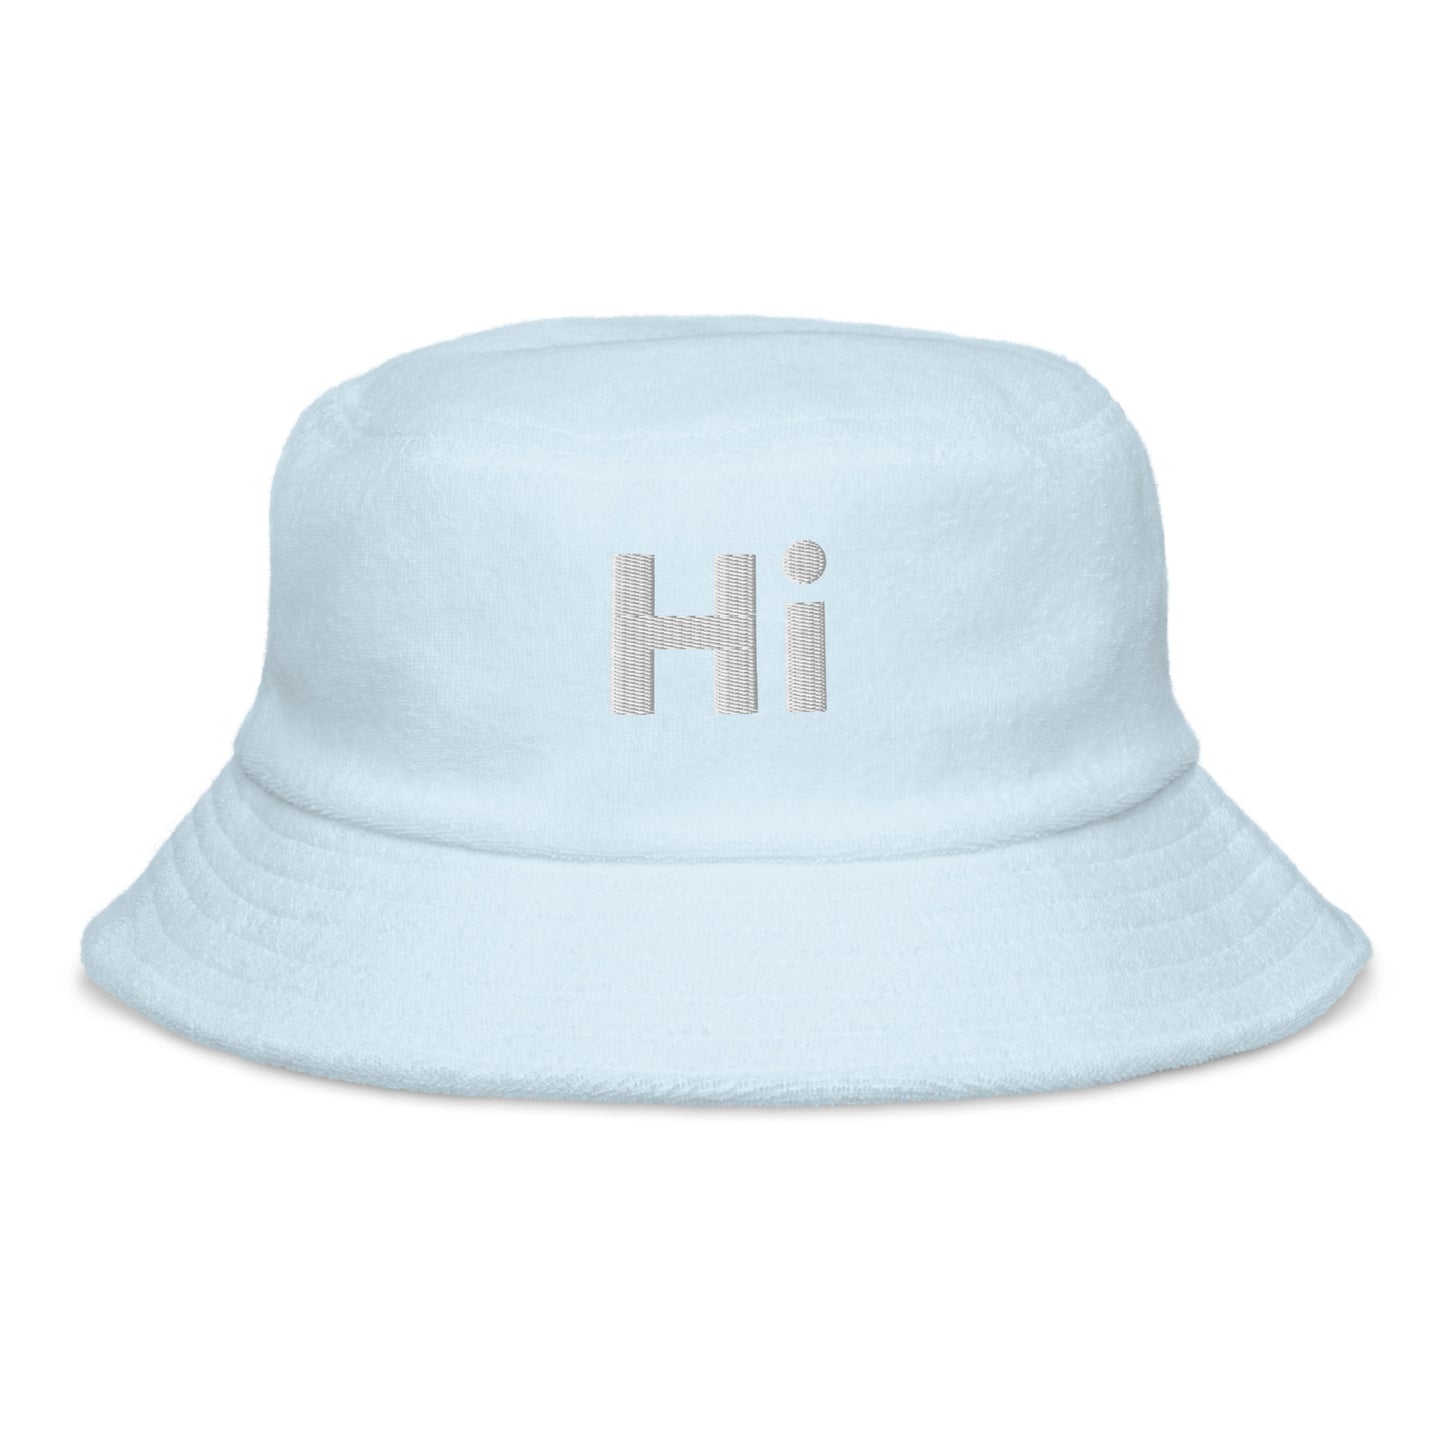 Hi Fuzzy Bucket Hat in light blue by Johnny Michael at HiJohnny.com. It’s fuzzy, fashionable and friendly. Put it on your head and go greet the world.